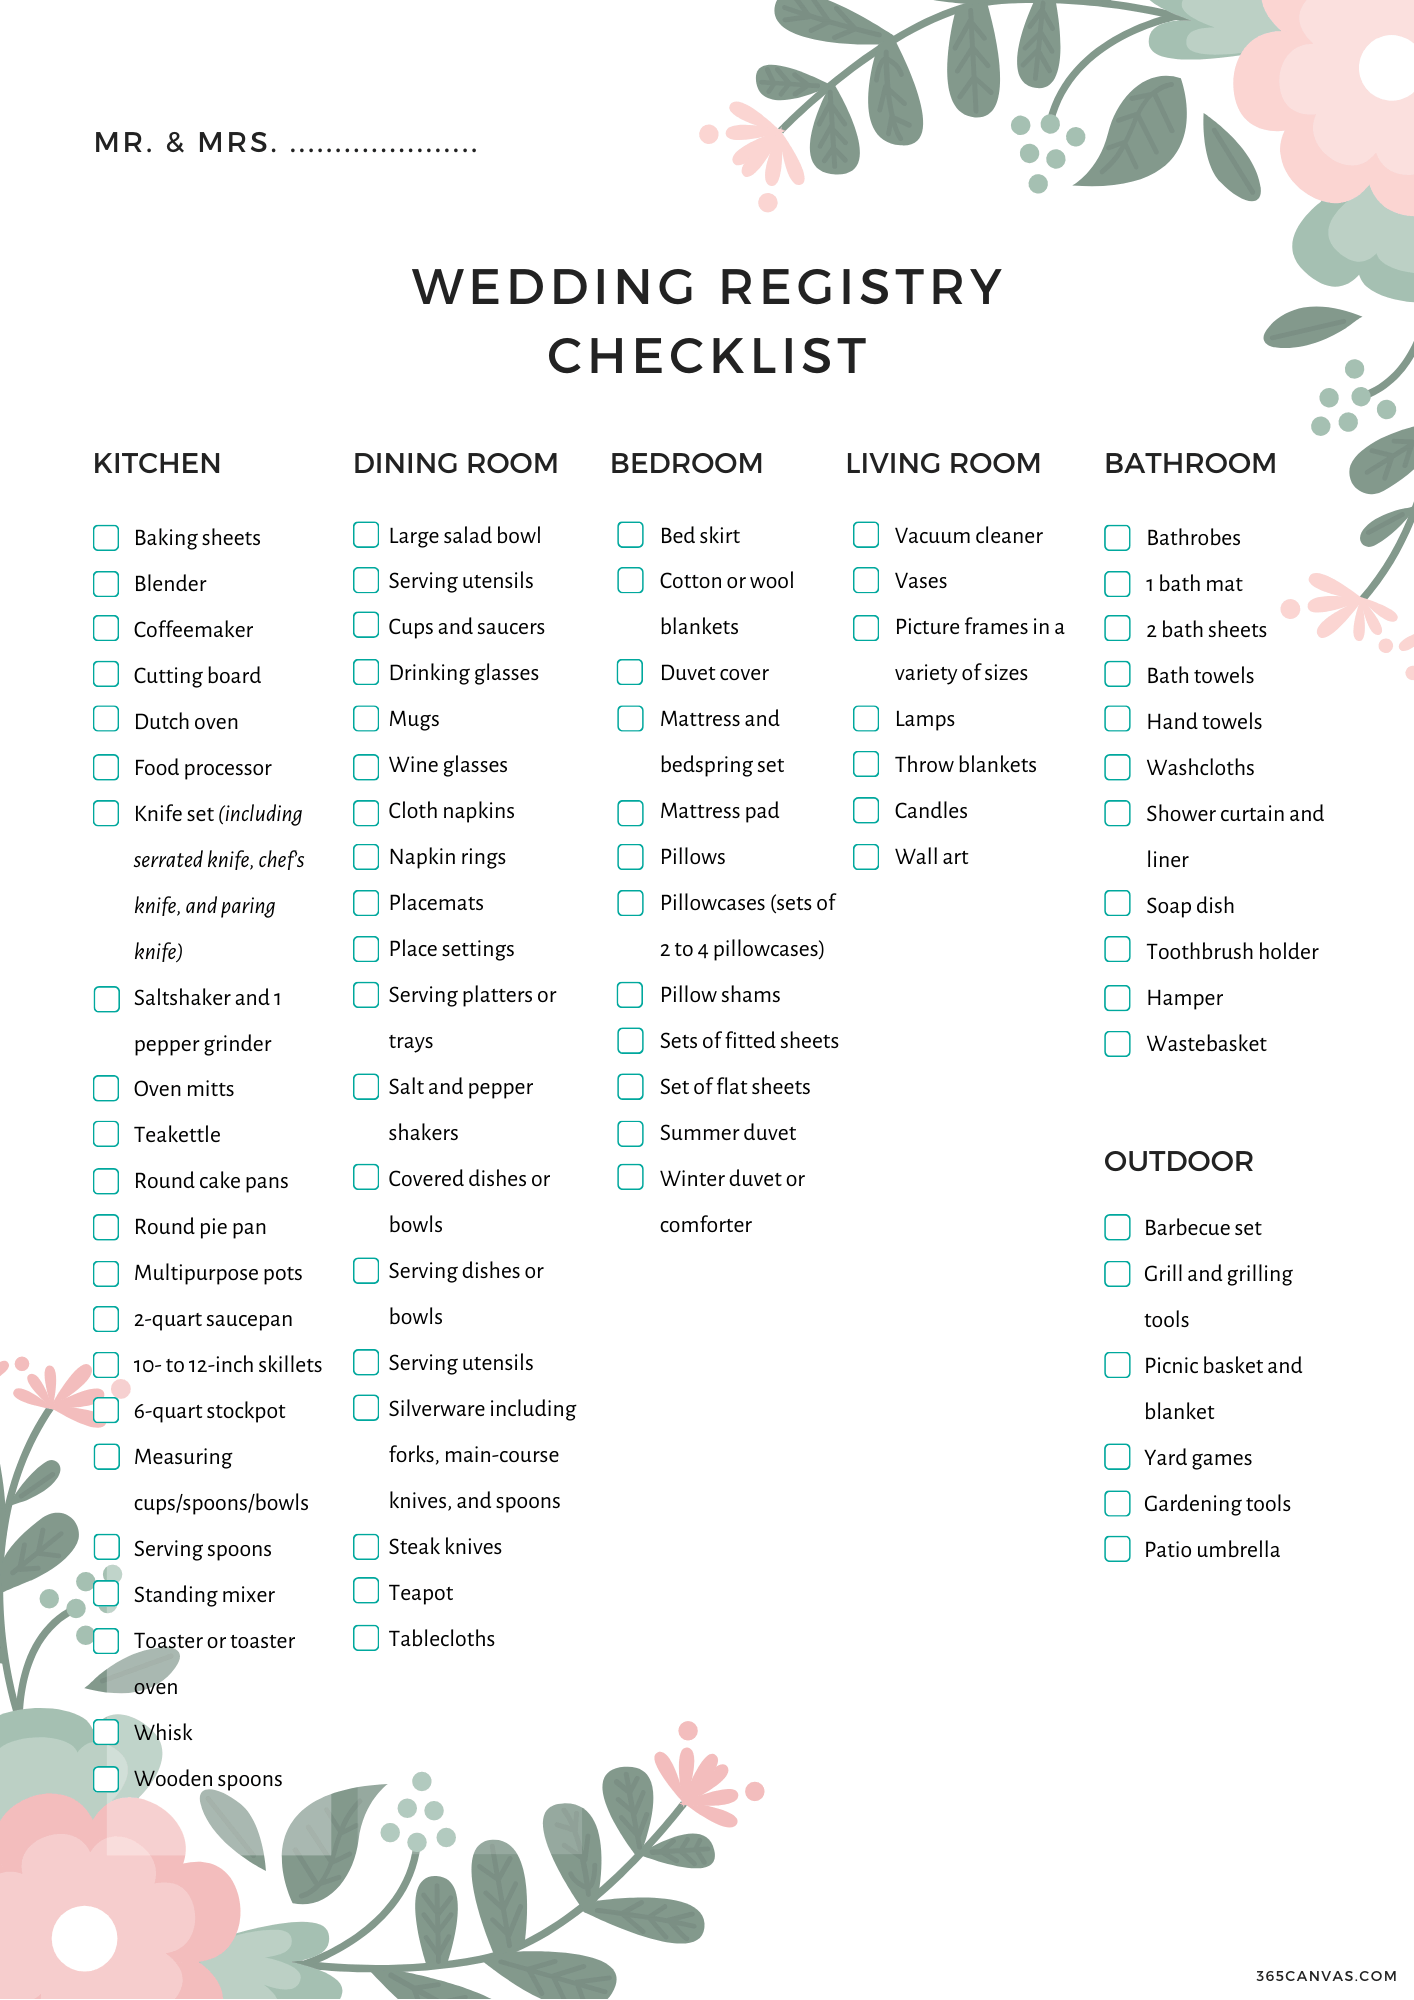 The Complete Wedding Registry Checklist (Free Printable) For Couples ...